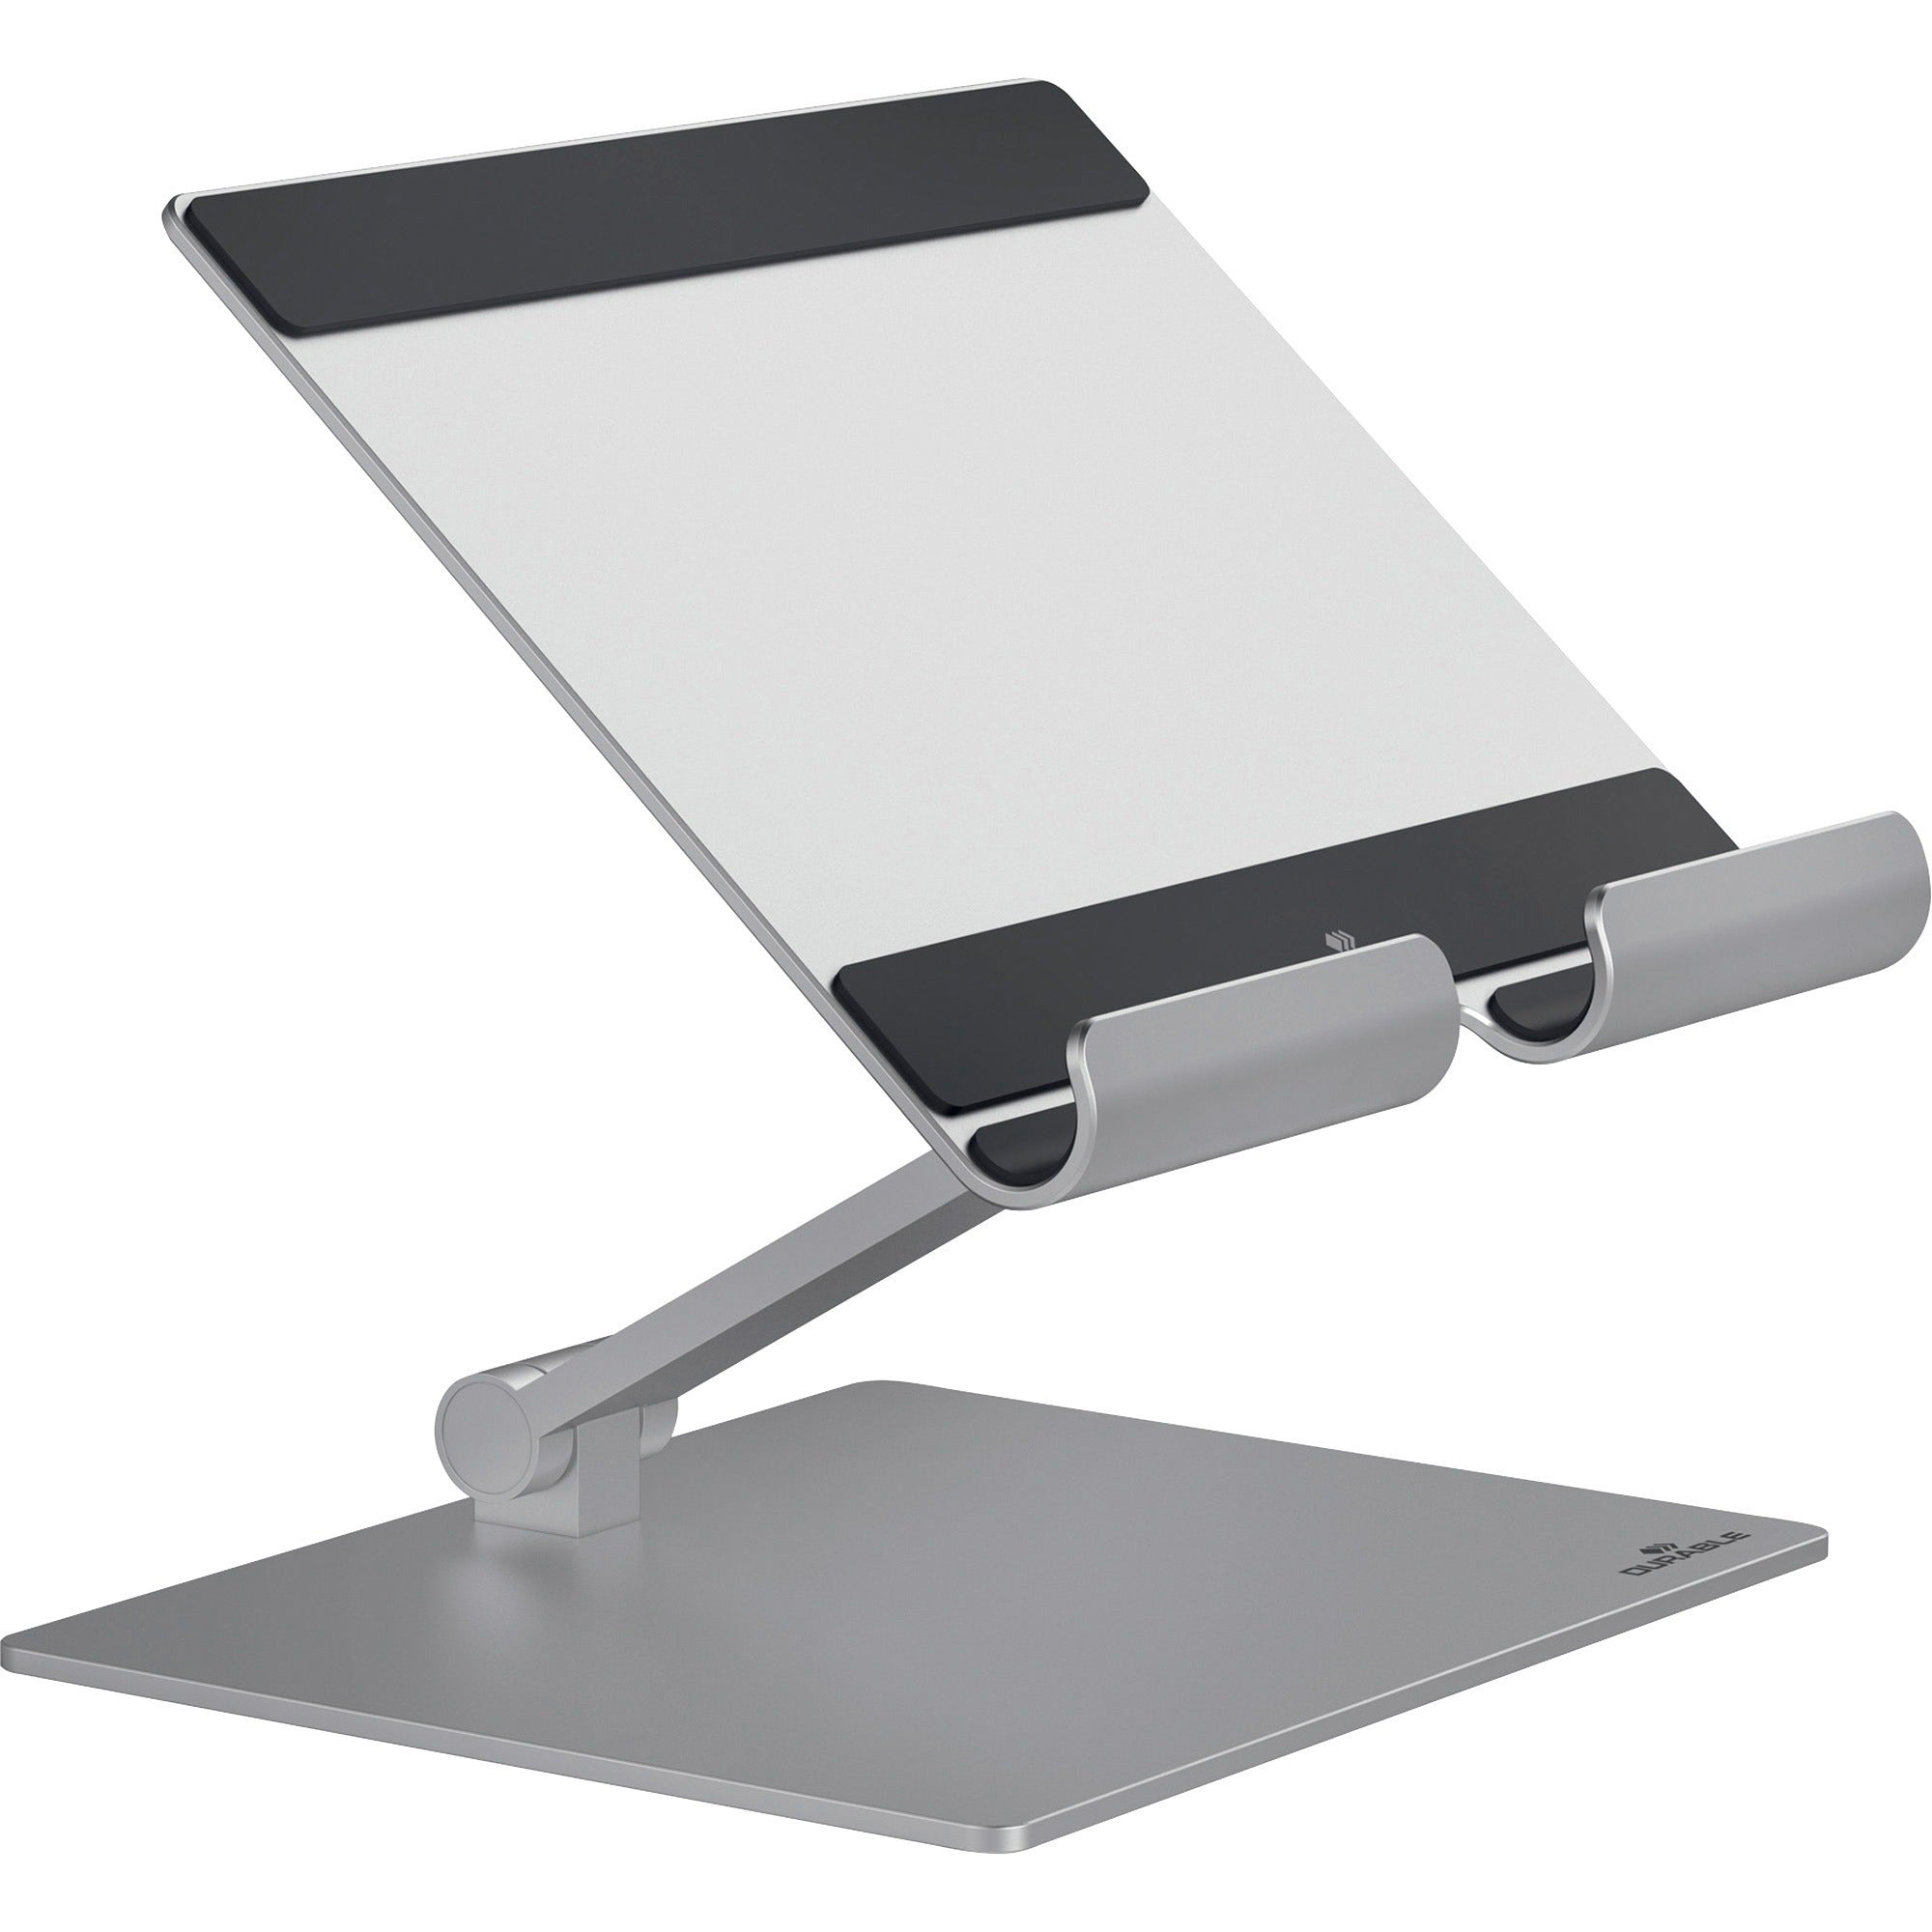 durable-rise-tablet-stand-up-to-13-screen-support-220-lb-load-capacity-81-height-x-67-width-x-54-depth-tabletop-aluminum-silver_dbl894023 - 1